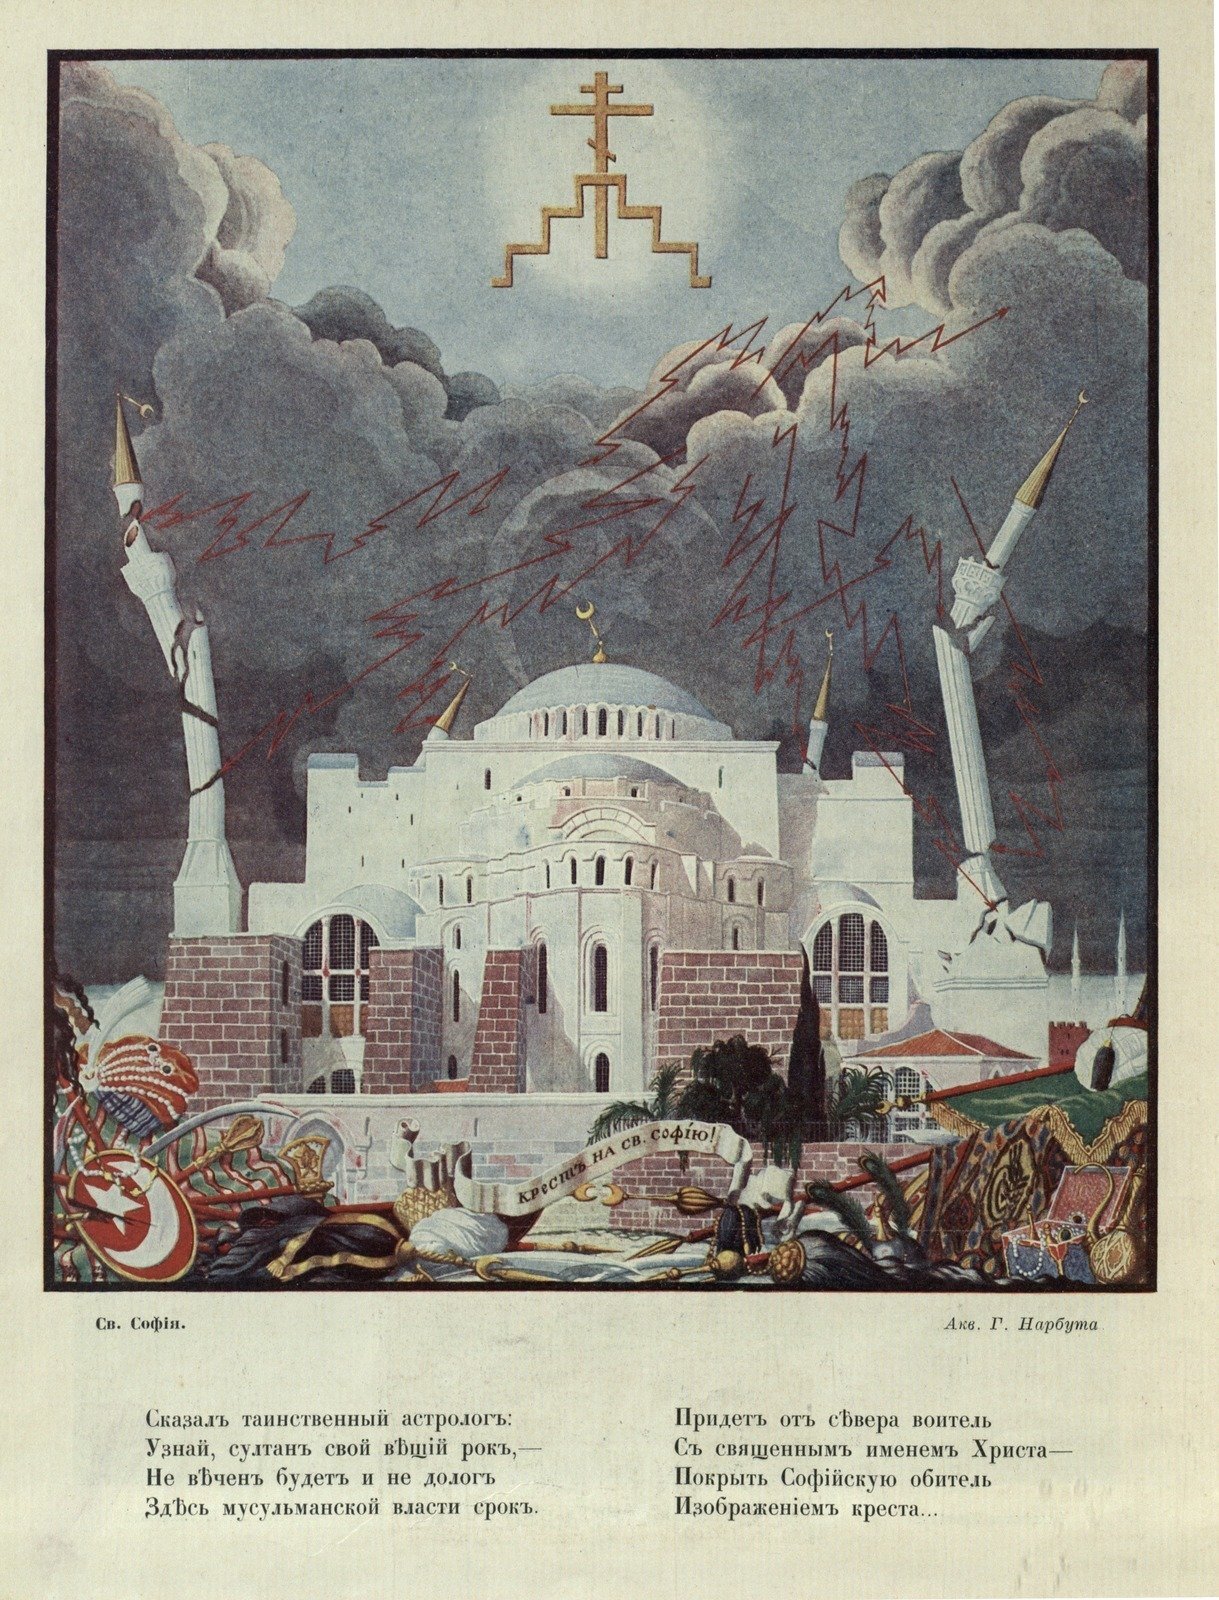 Georgy Narbut, St. Sophia Cross. Illustration from the magazine Lukomorye, 32, 1914  State Public Historical Library of Russia, Moscow